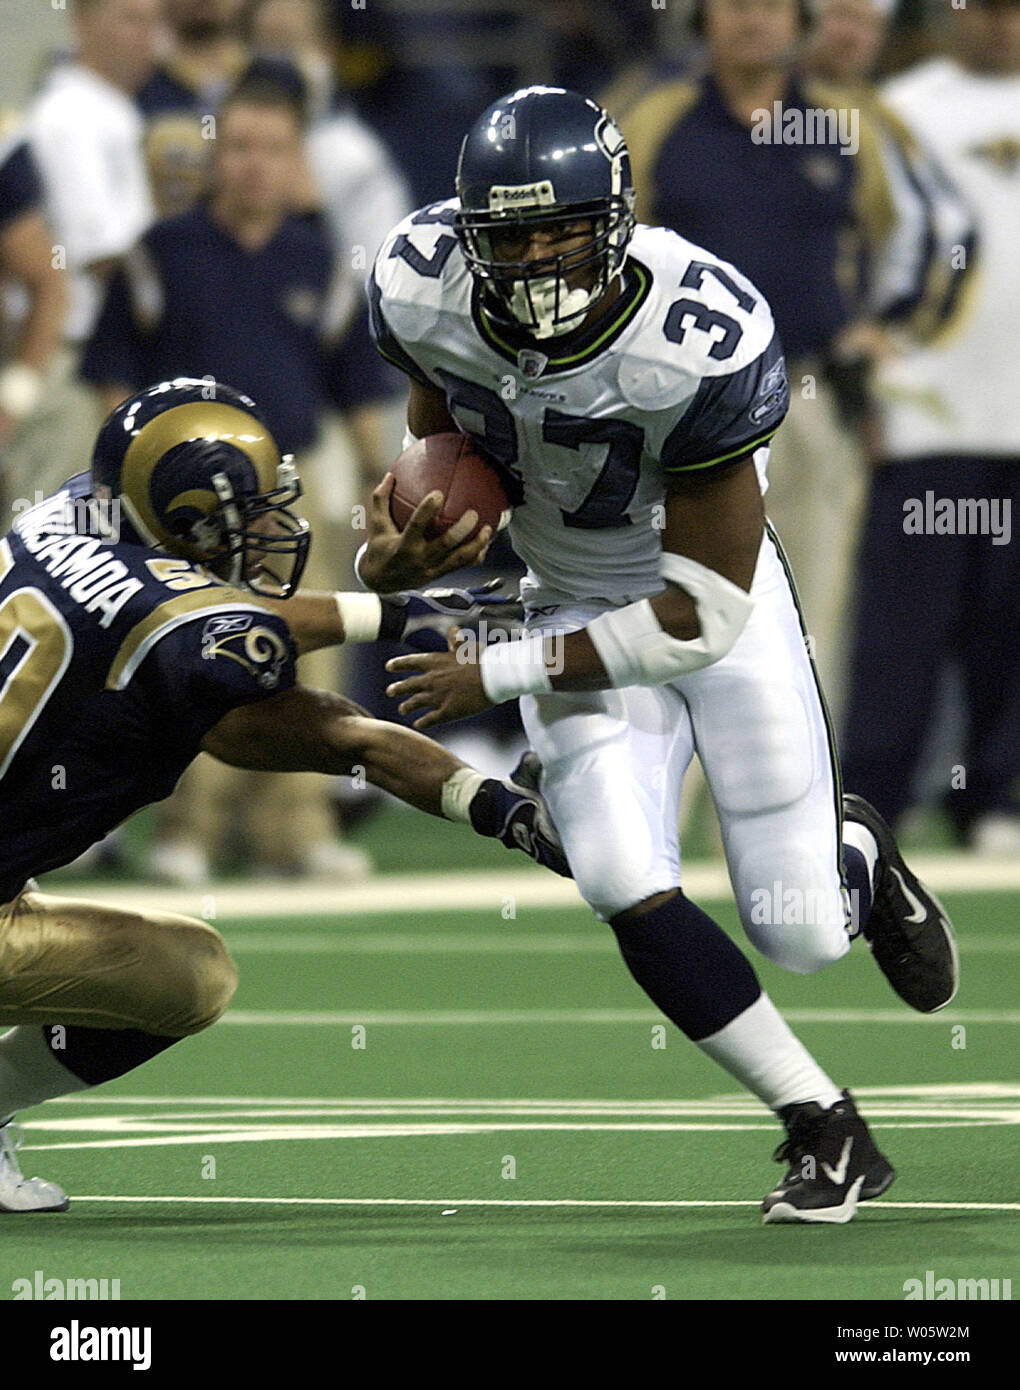 Seattle Seahawks running back Shaun Alexander rushes past St. Louis Rams Pisa Tinoisamoa for a first down at the Edward Jones Dome in St. Louis on Decmber 14, 2003. Alexander rushed for 126 yards on 25 carries with 1 touchdown as the Rams defeated the Seahawks 27-22.  (UPI Photo/Scott Rovak) Stock Photo